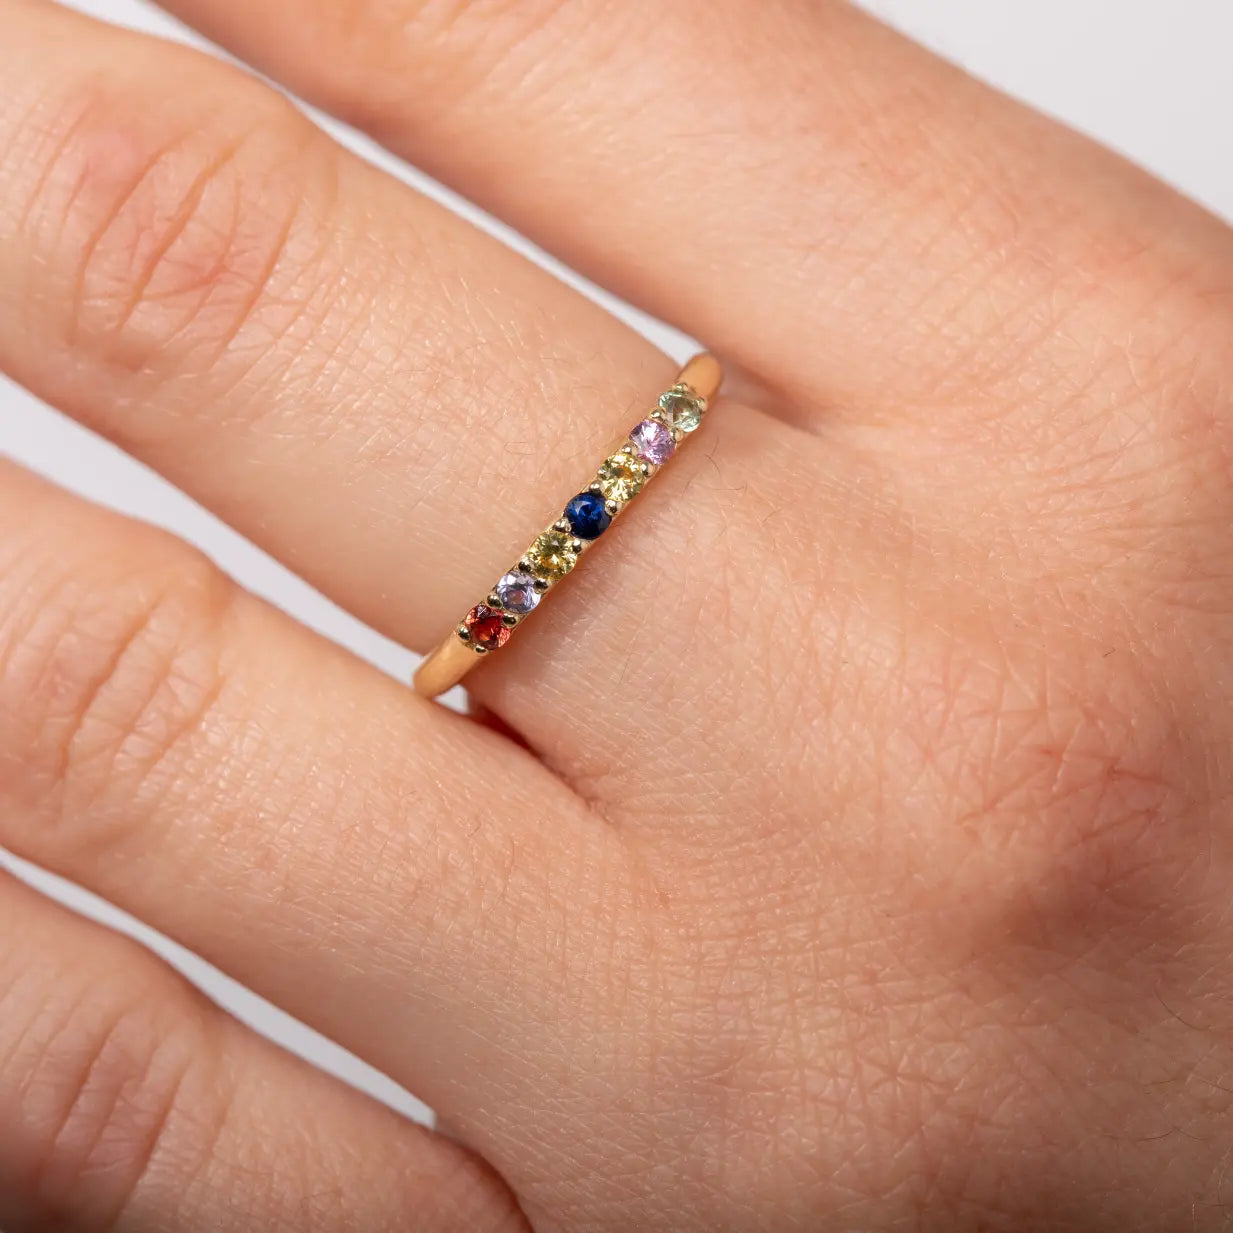 Half Eternity Ring Colorful Sapphires 14K Gold